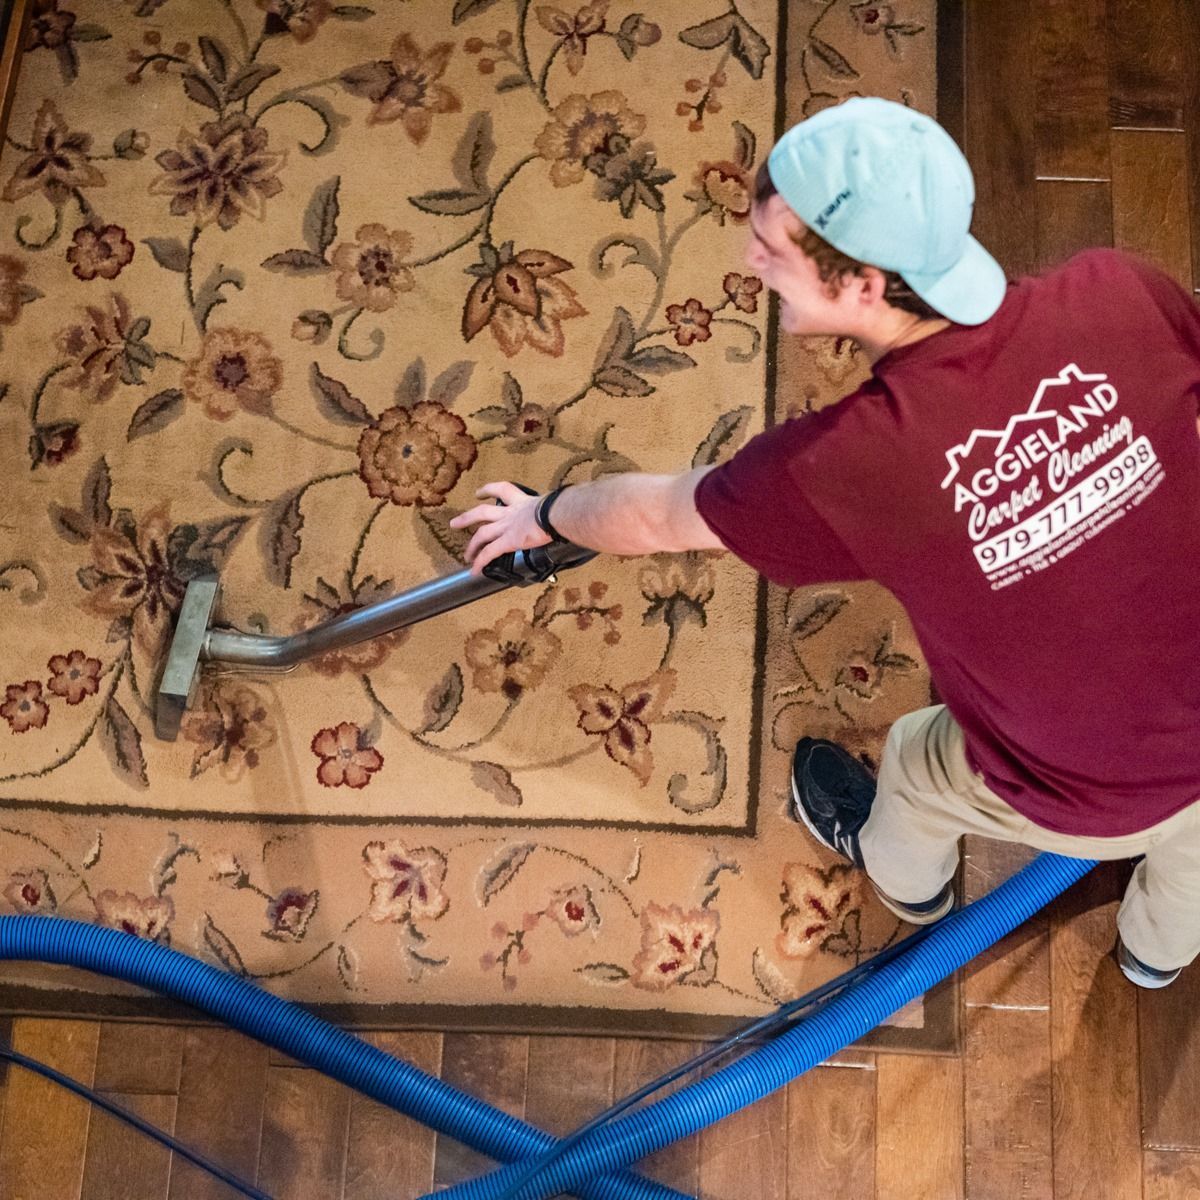 a man wearing a burgundy shirt that says aggieland carpet cleaning is vacuuming a rug